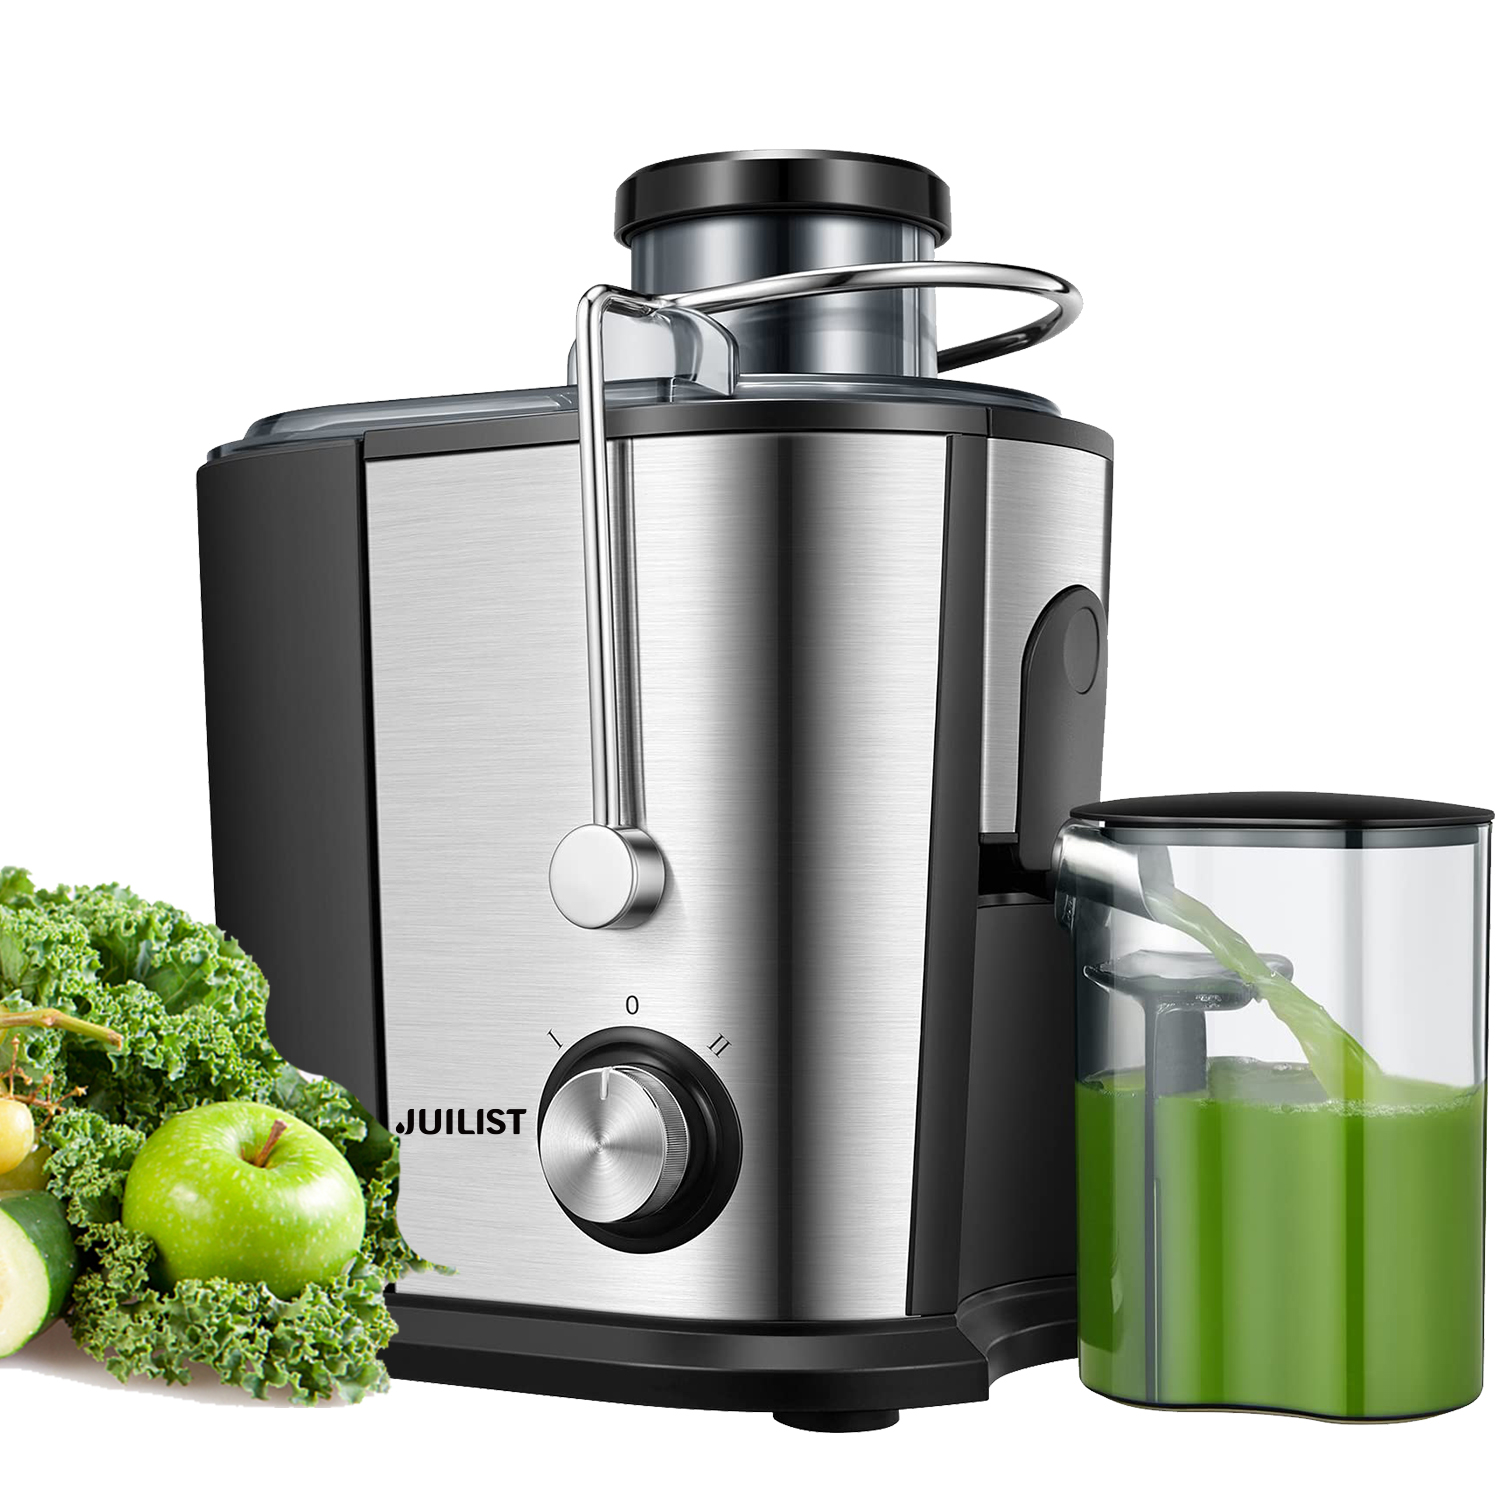 Juilsit Juicer Easy to Clean, 3 " Juice Extractor BPA Free Compact Fruits & Vegetables Juicer, Dual Speed Centrifugal Juicer with Non-Drip Function, Stainless Steel Juicers - image 1 of 8